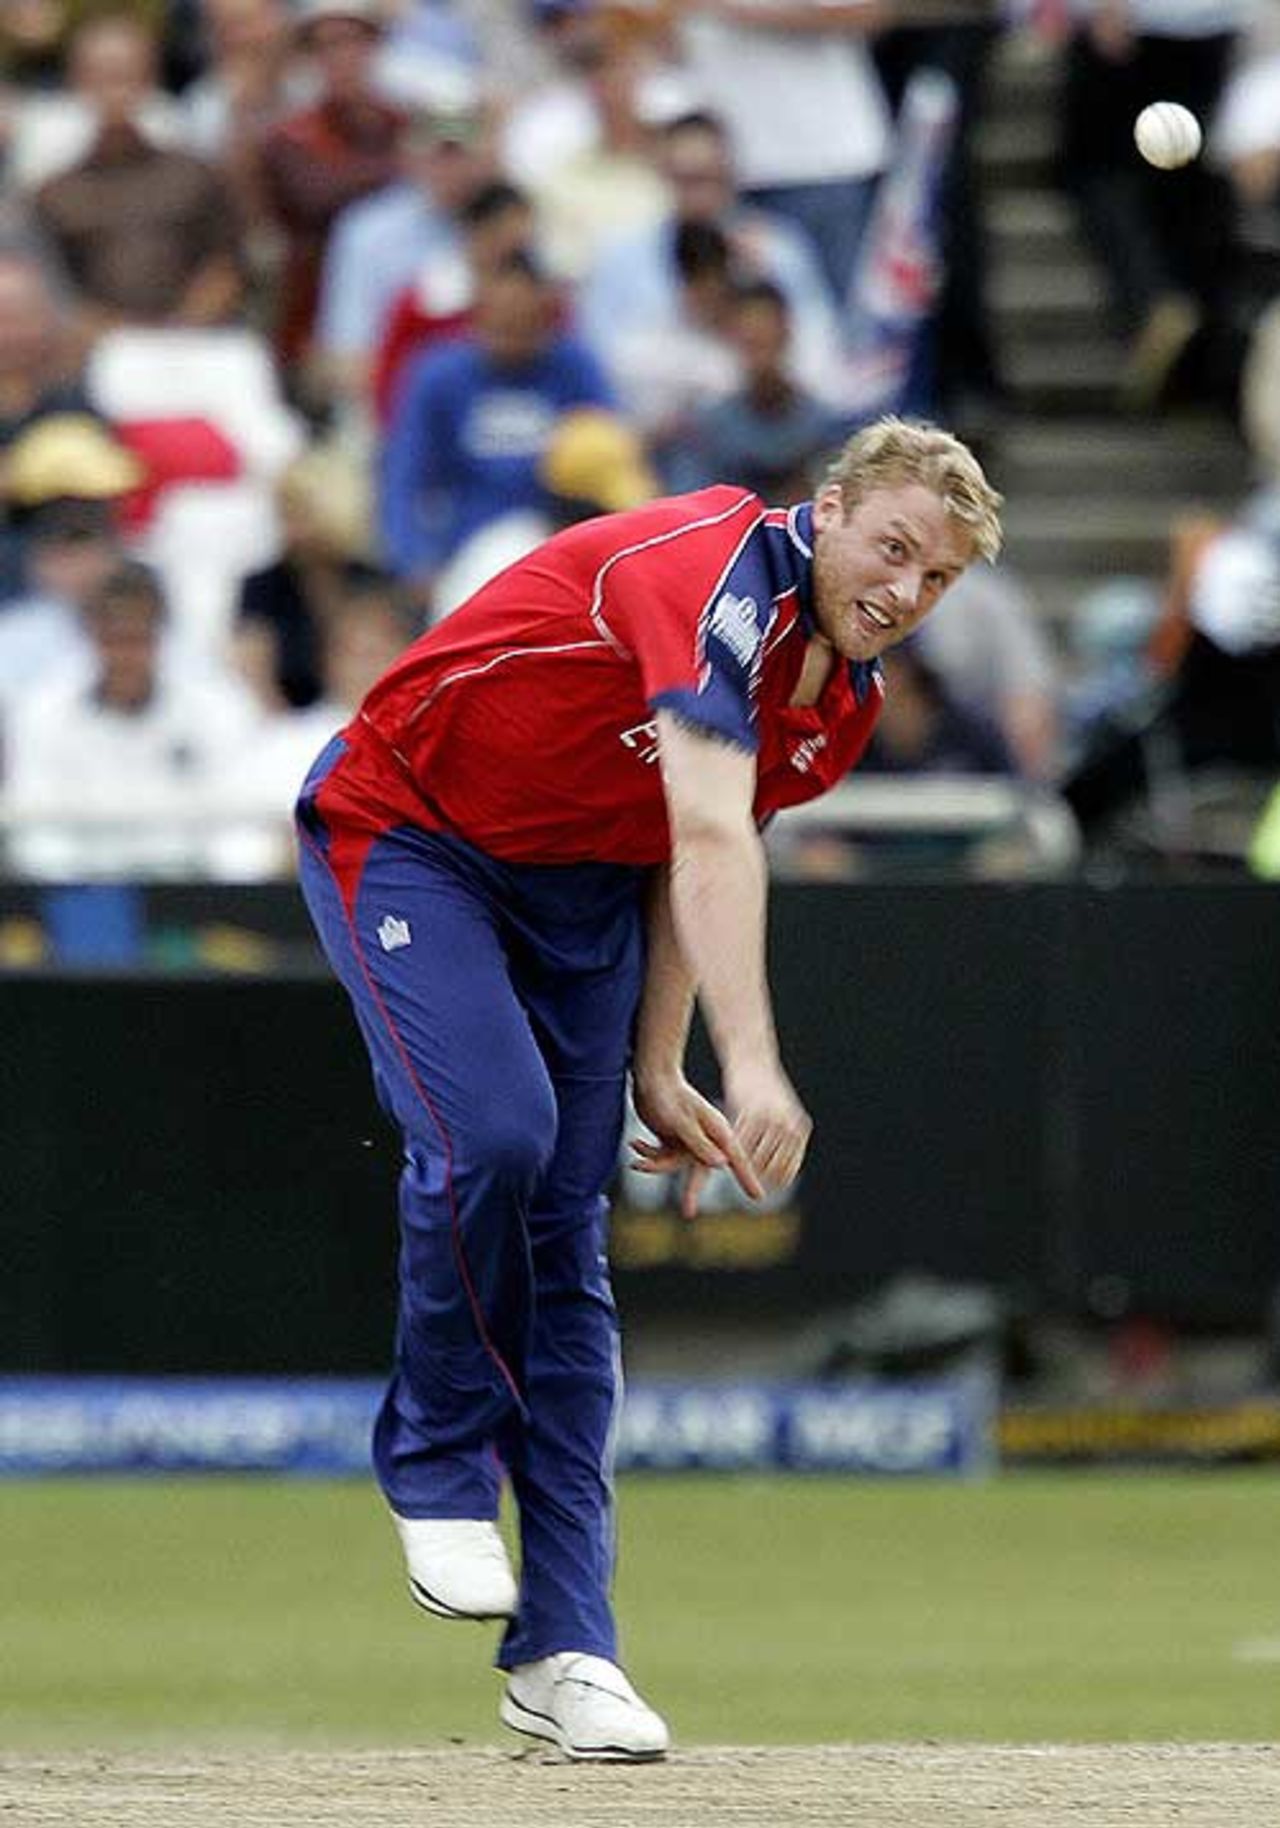 Andrew Flintoff charges in to bowl, Group B, ICC World Twenty20, Cape Town, September 14, 2007